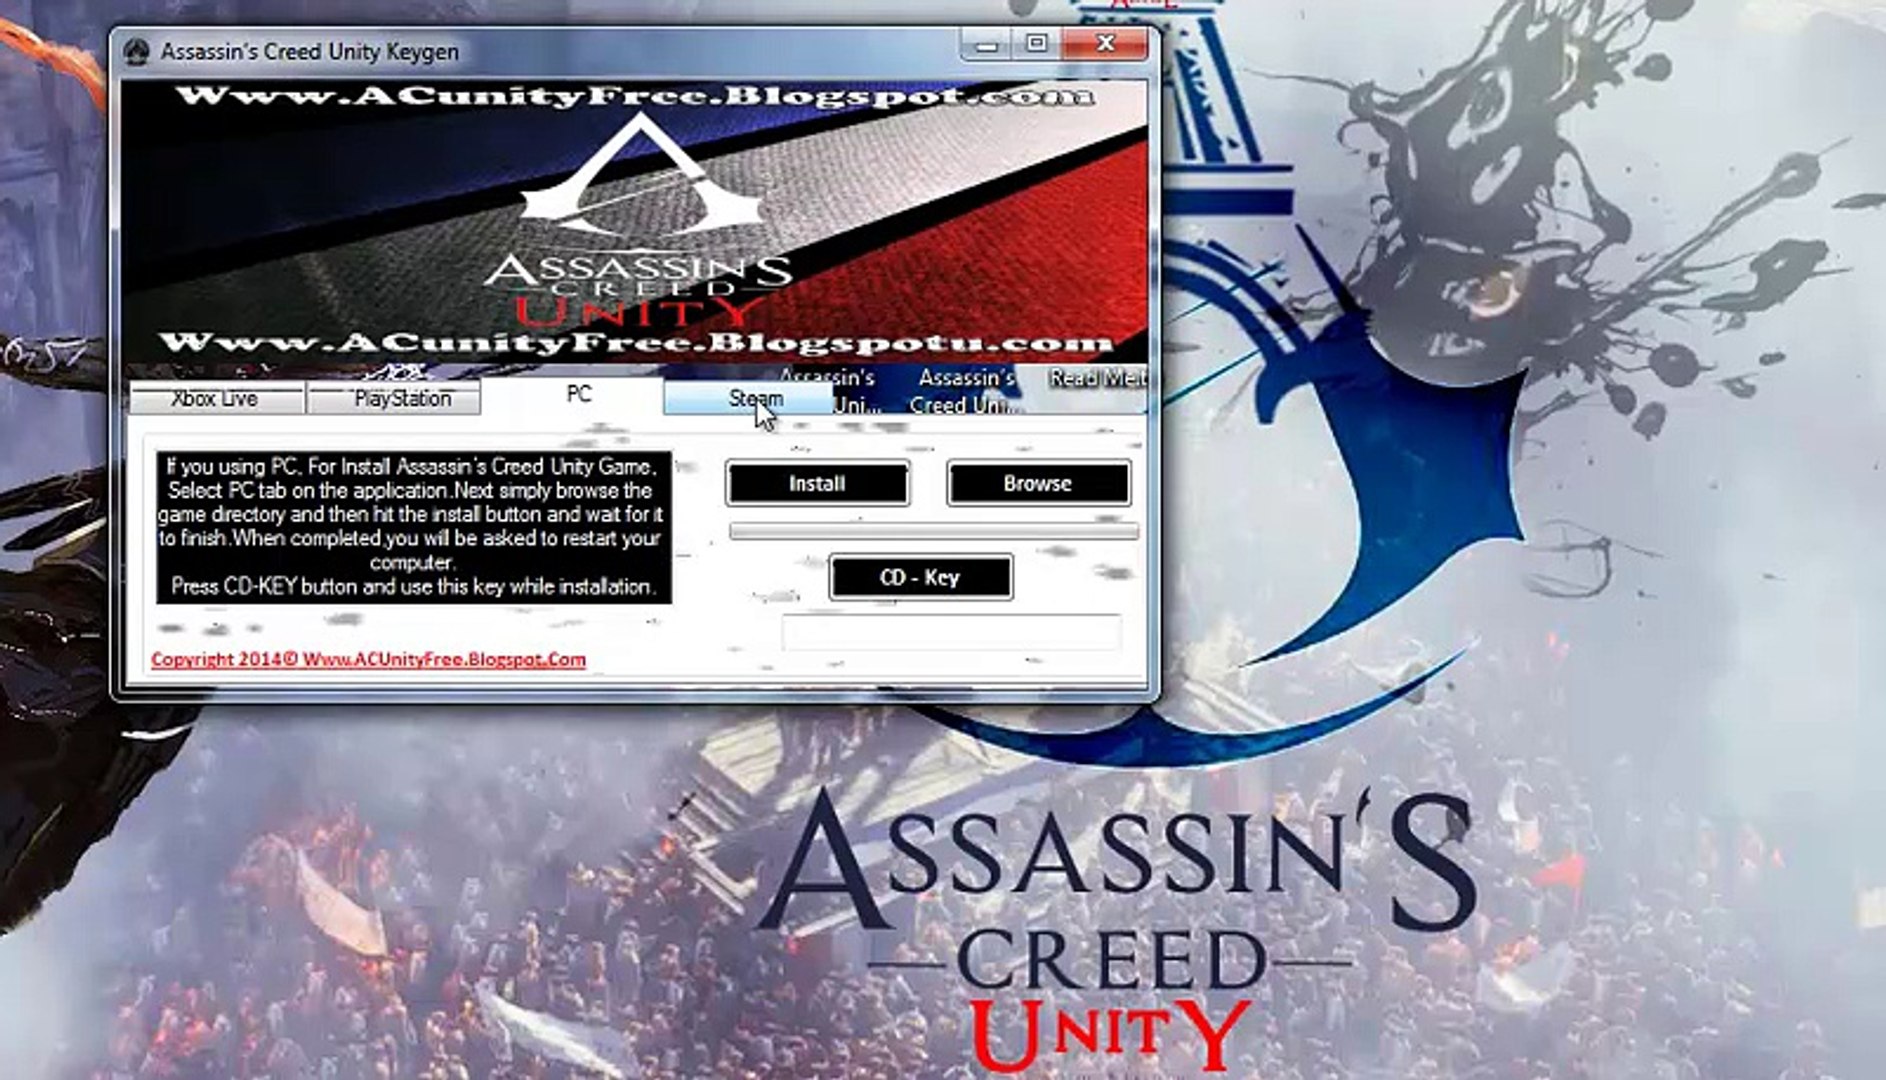 How to Unlock/Install Assassin's Creed Unity Free on Xbox 360 PS3 And PC -  Steam - video Dailymotion